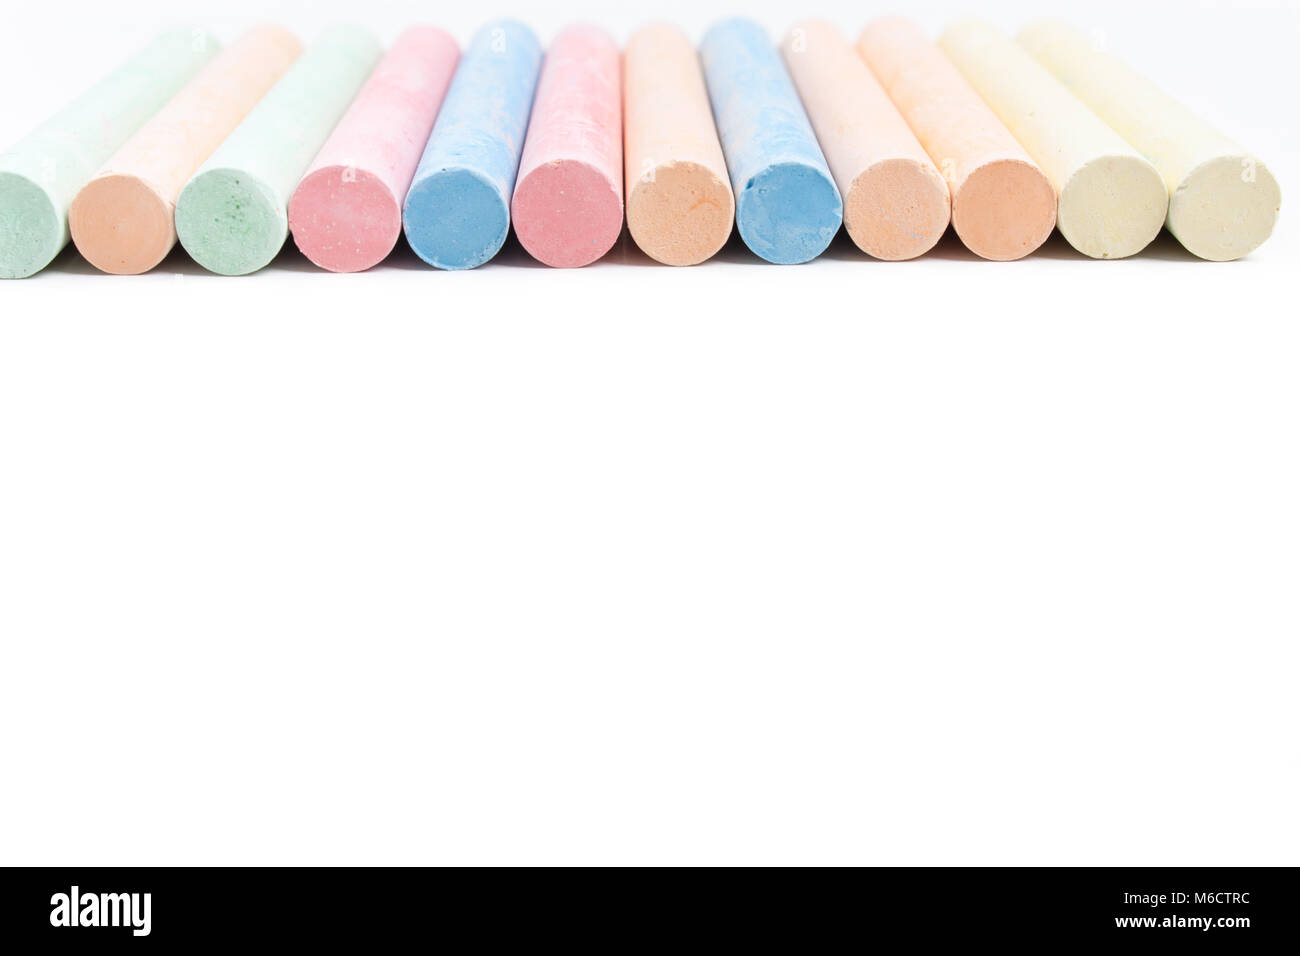 7,300+ Piece Of White Chalk Stock Photos, Pictures & Royalty-Free